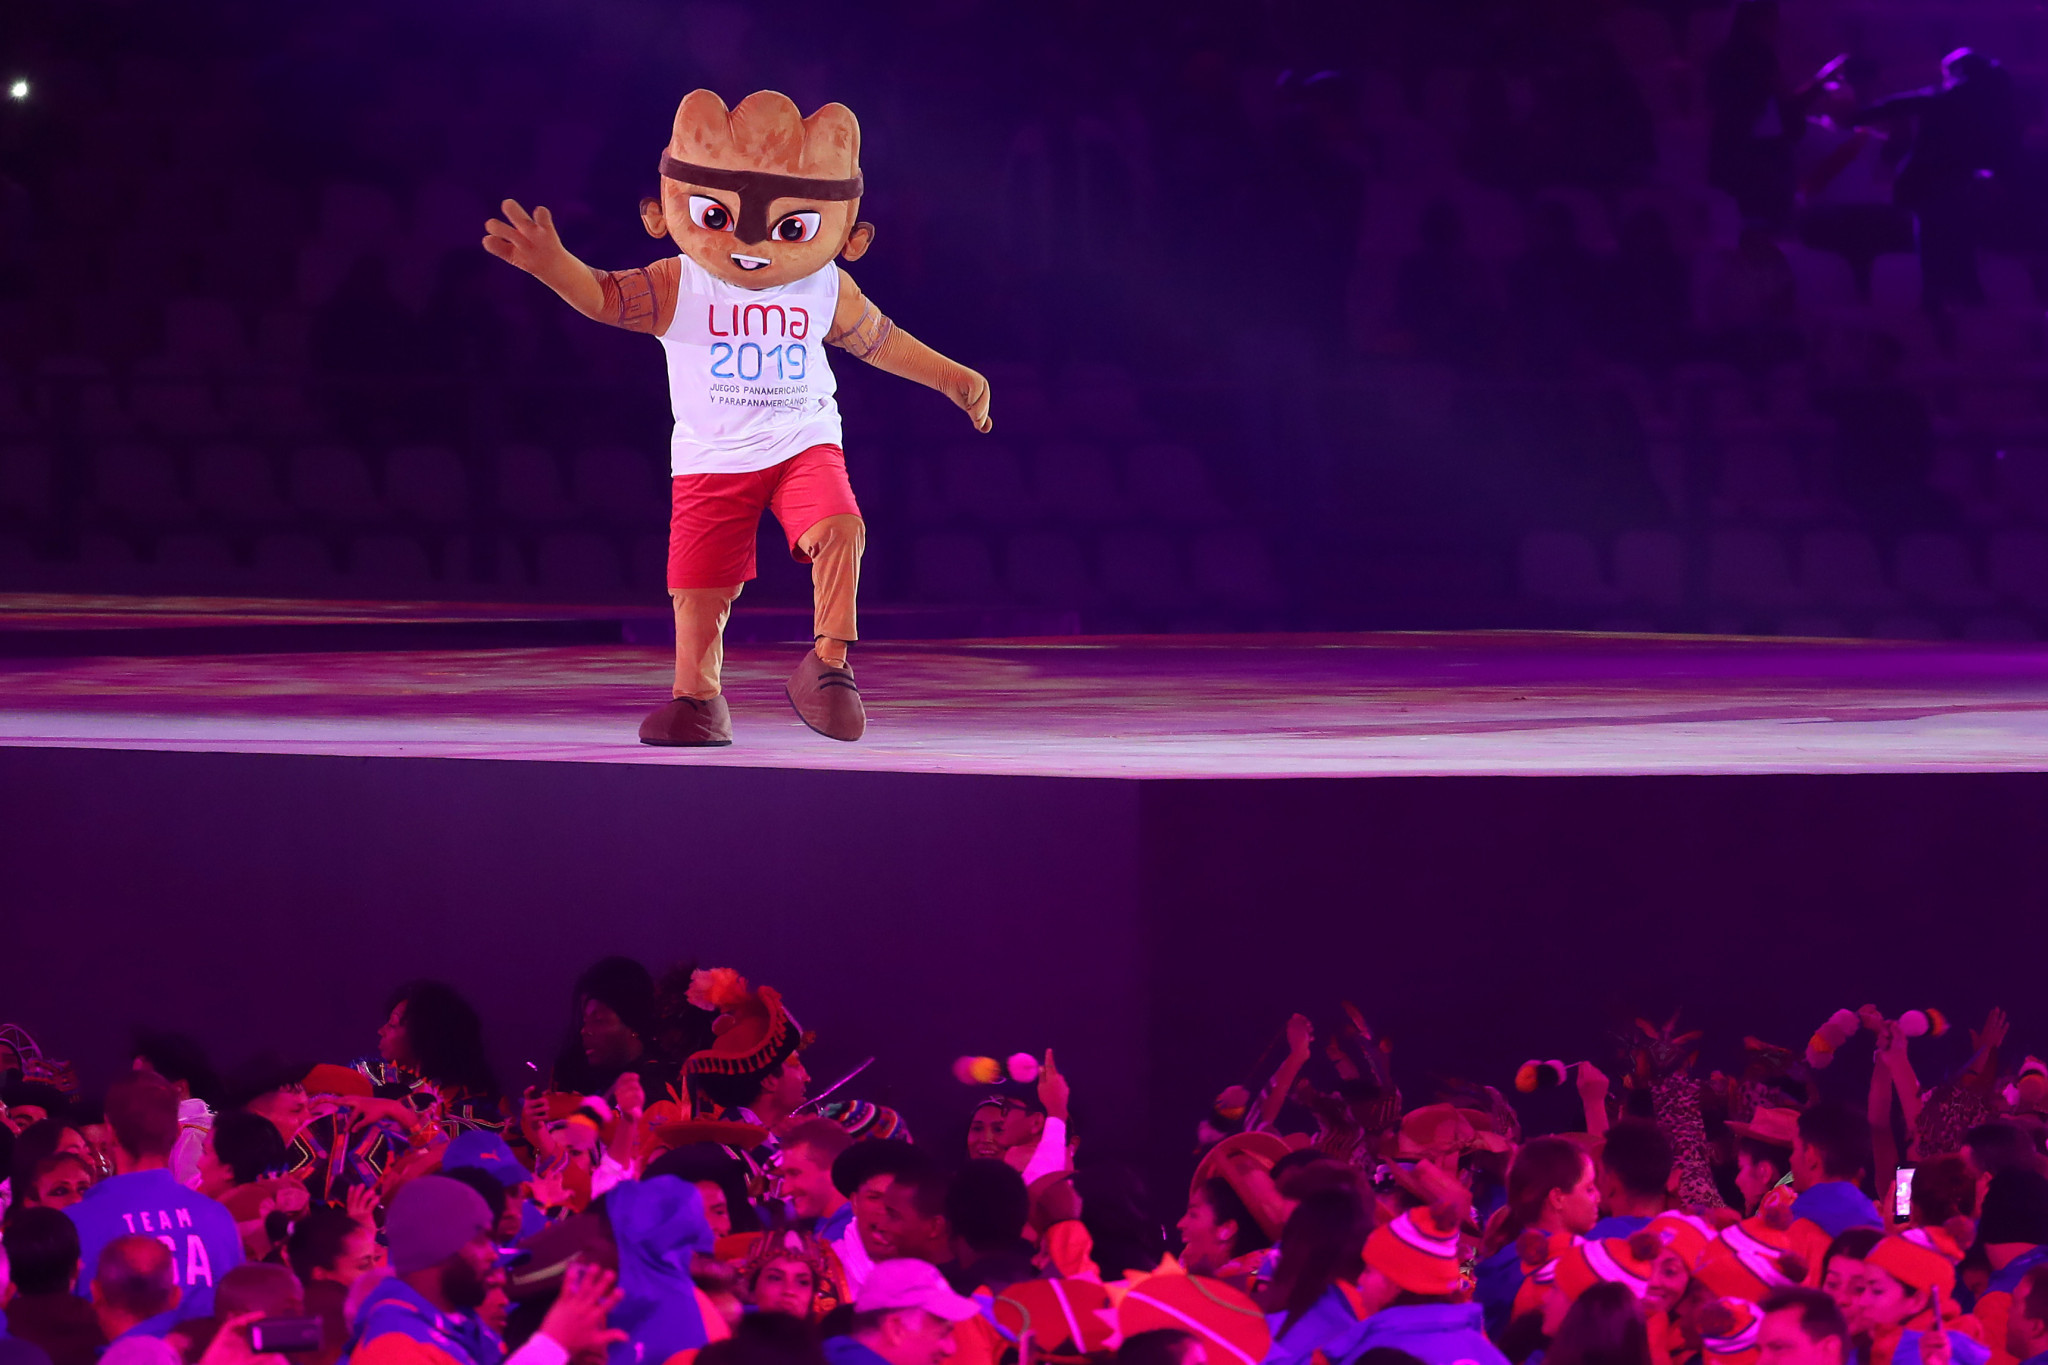 The Lima 2019 mascot, Milco, made his last appearance at the Games ©Getty Images